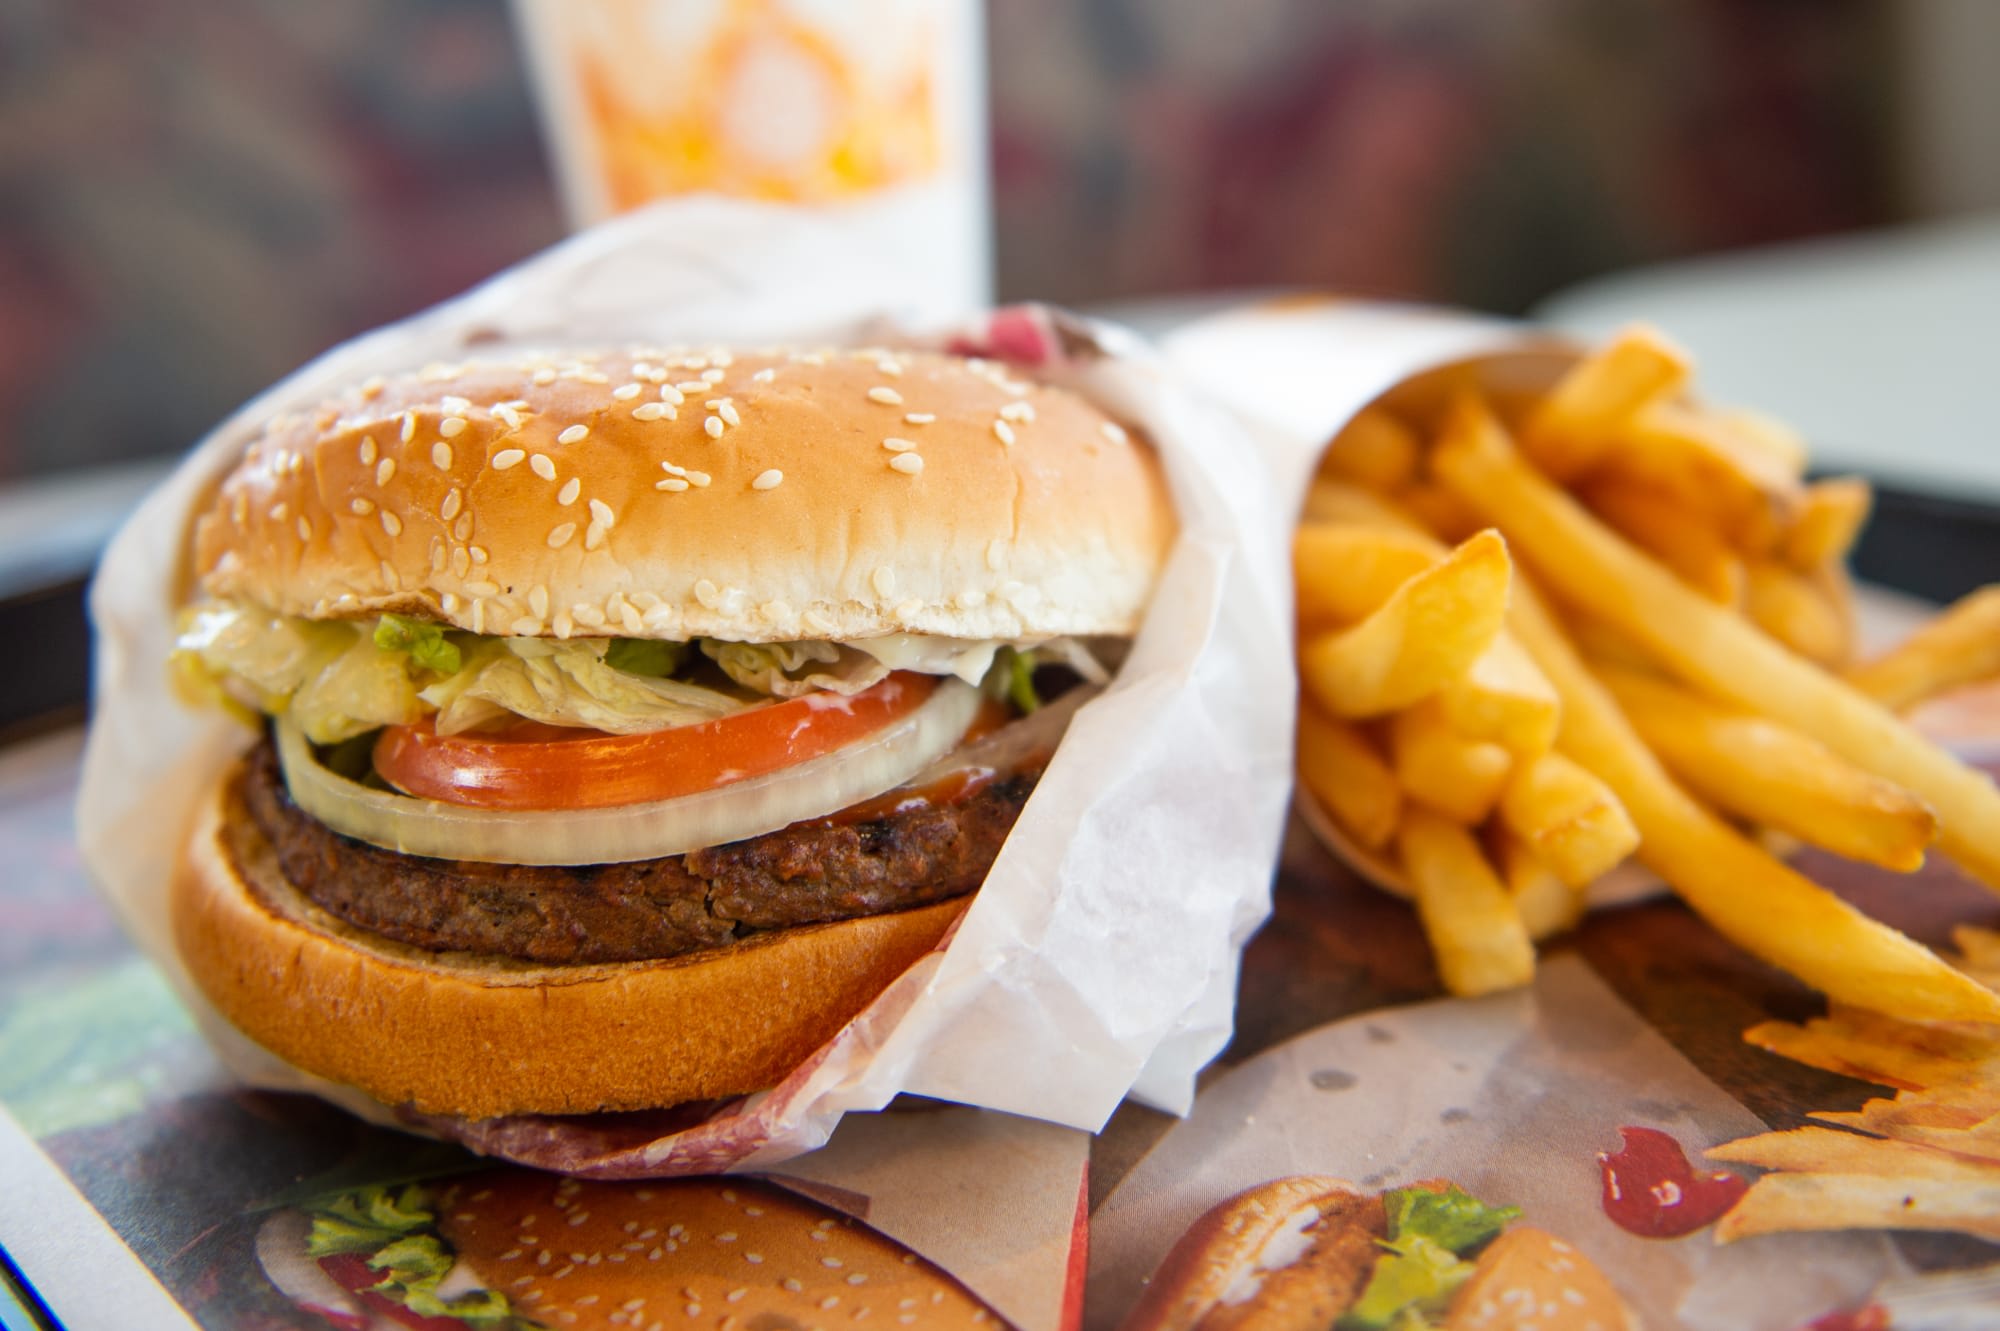 Burger King plans to sell the Impossible Whopper nationwide this year